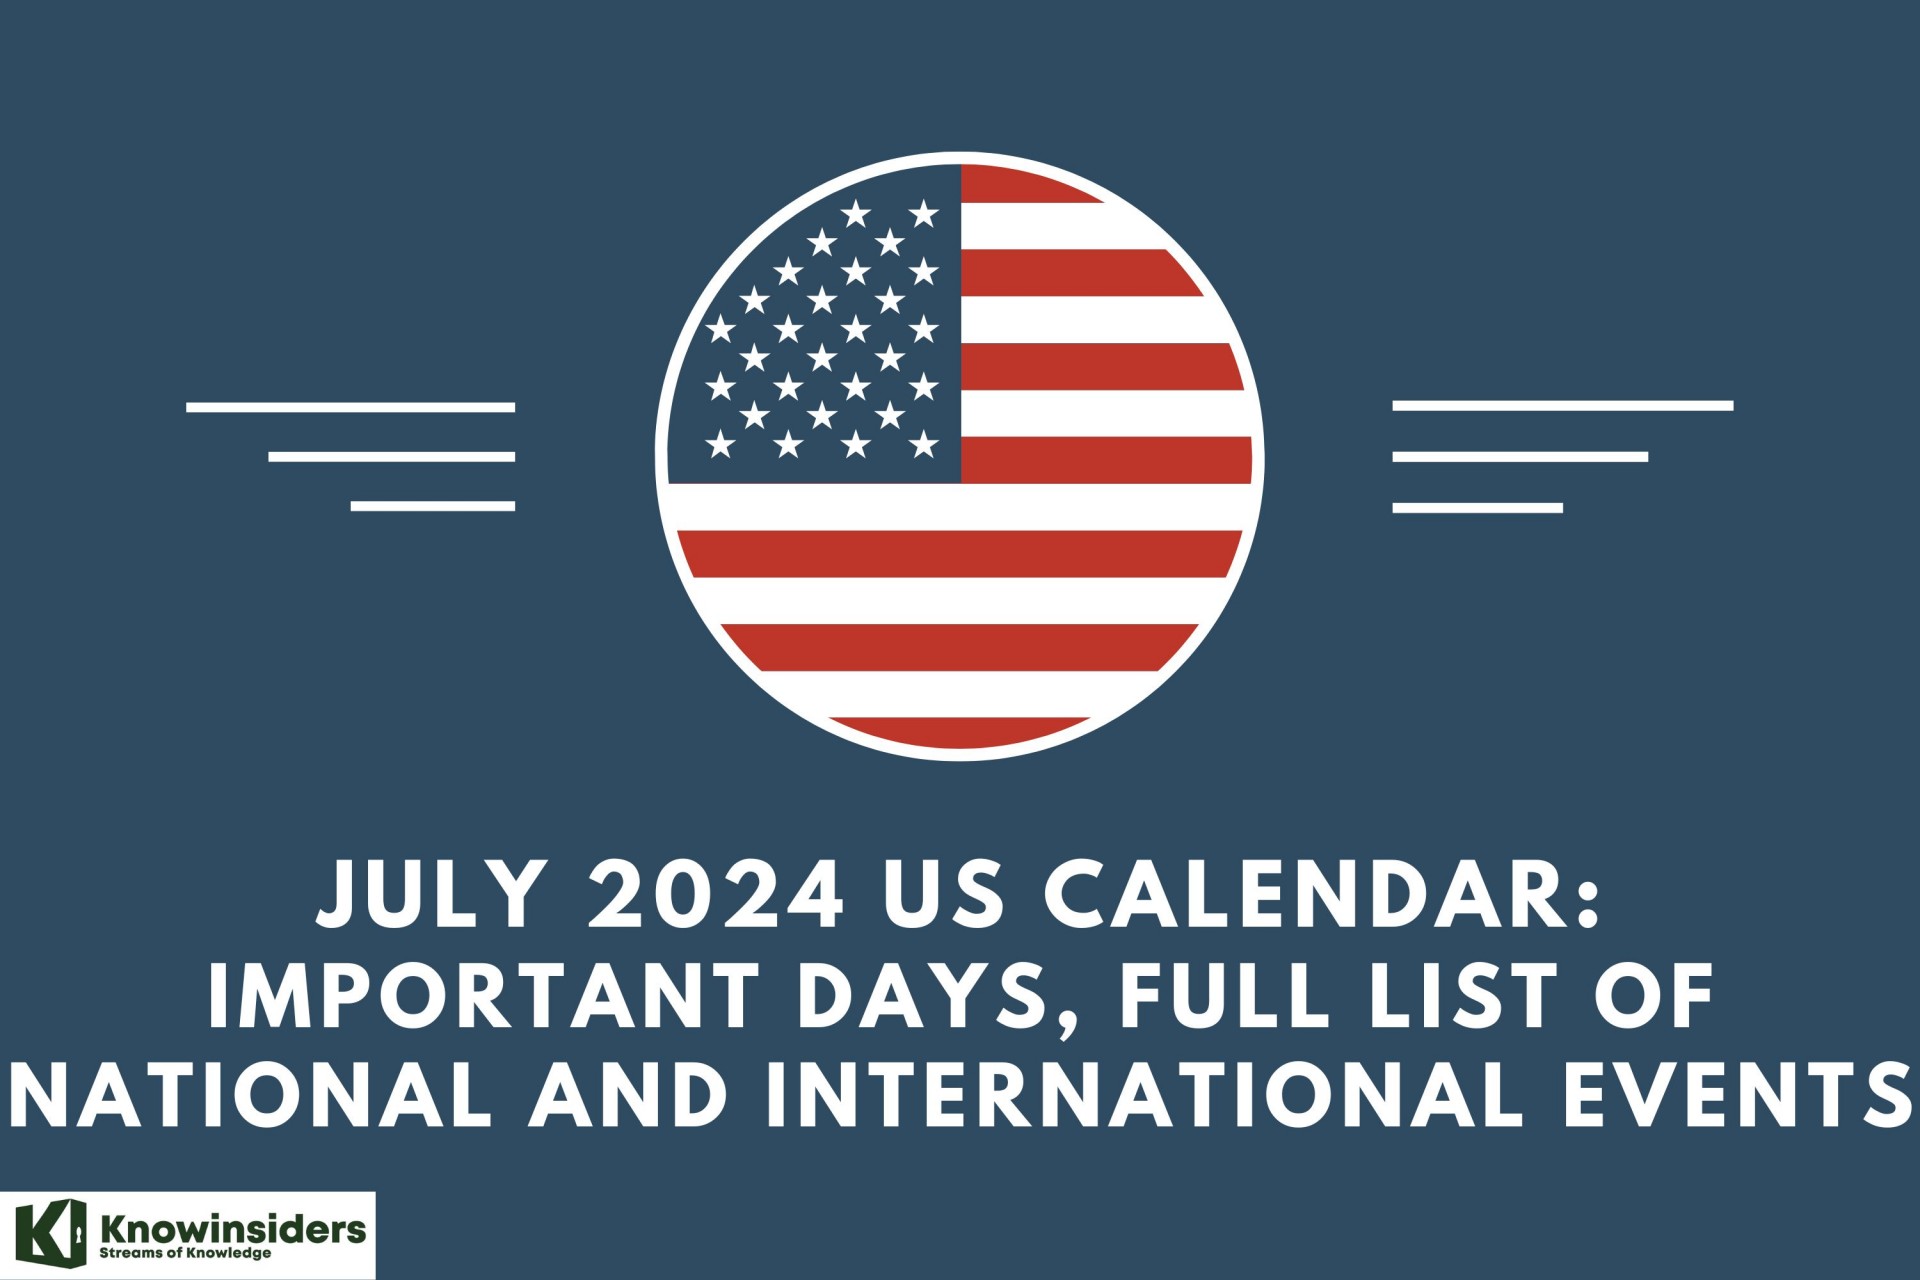 July 2024 USA Calendar: Important Days, Full List of National and International Events